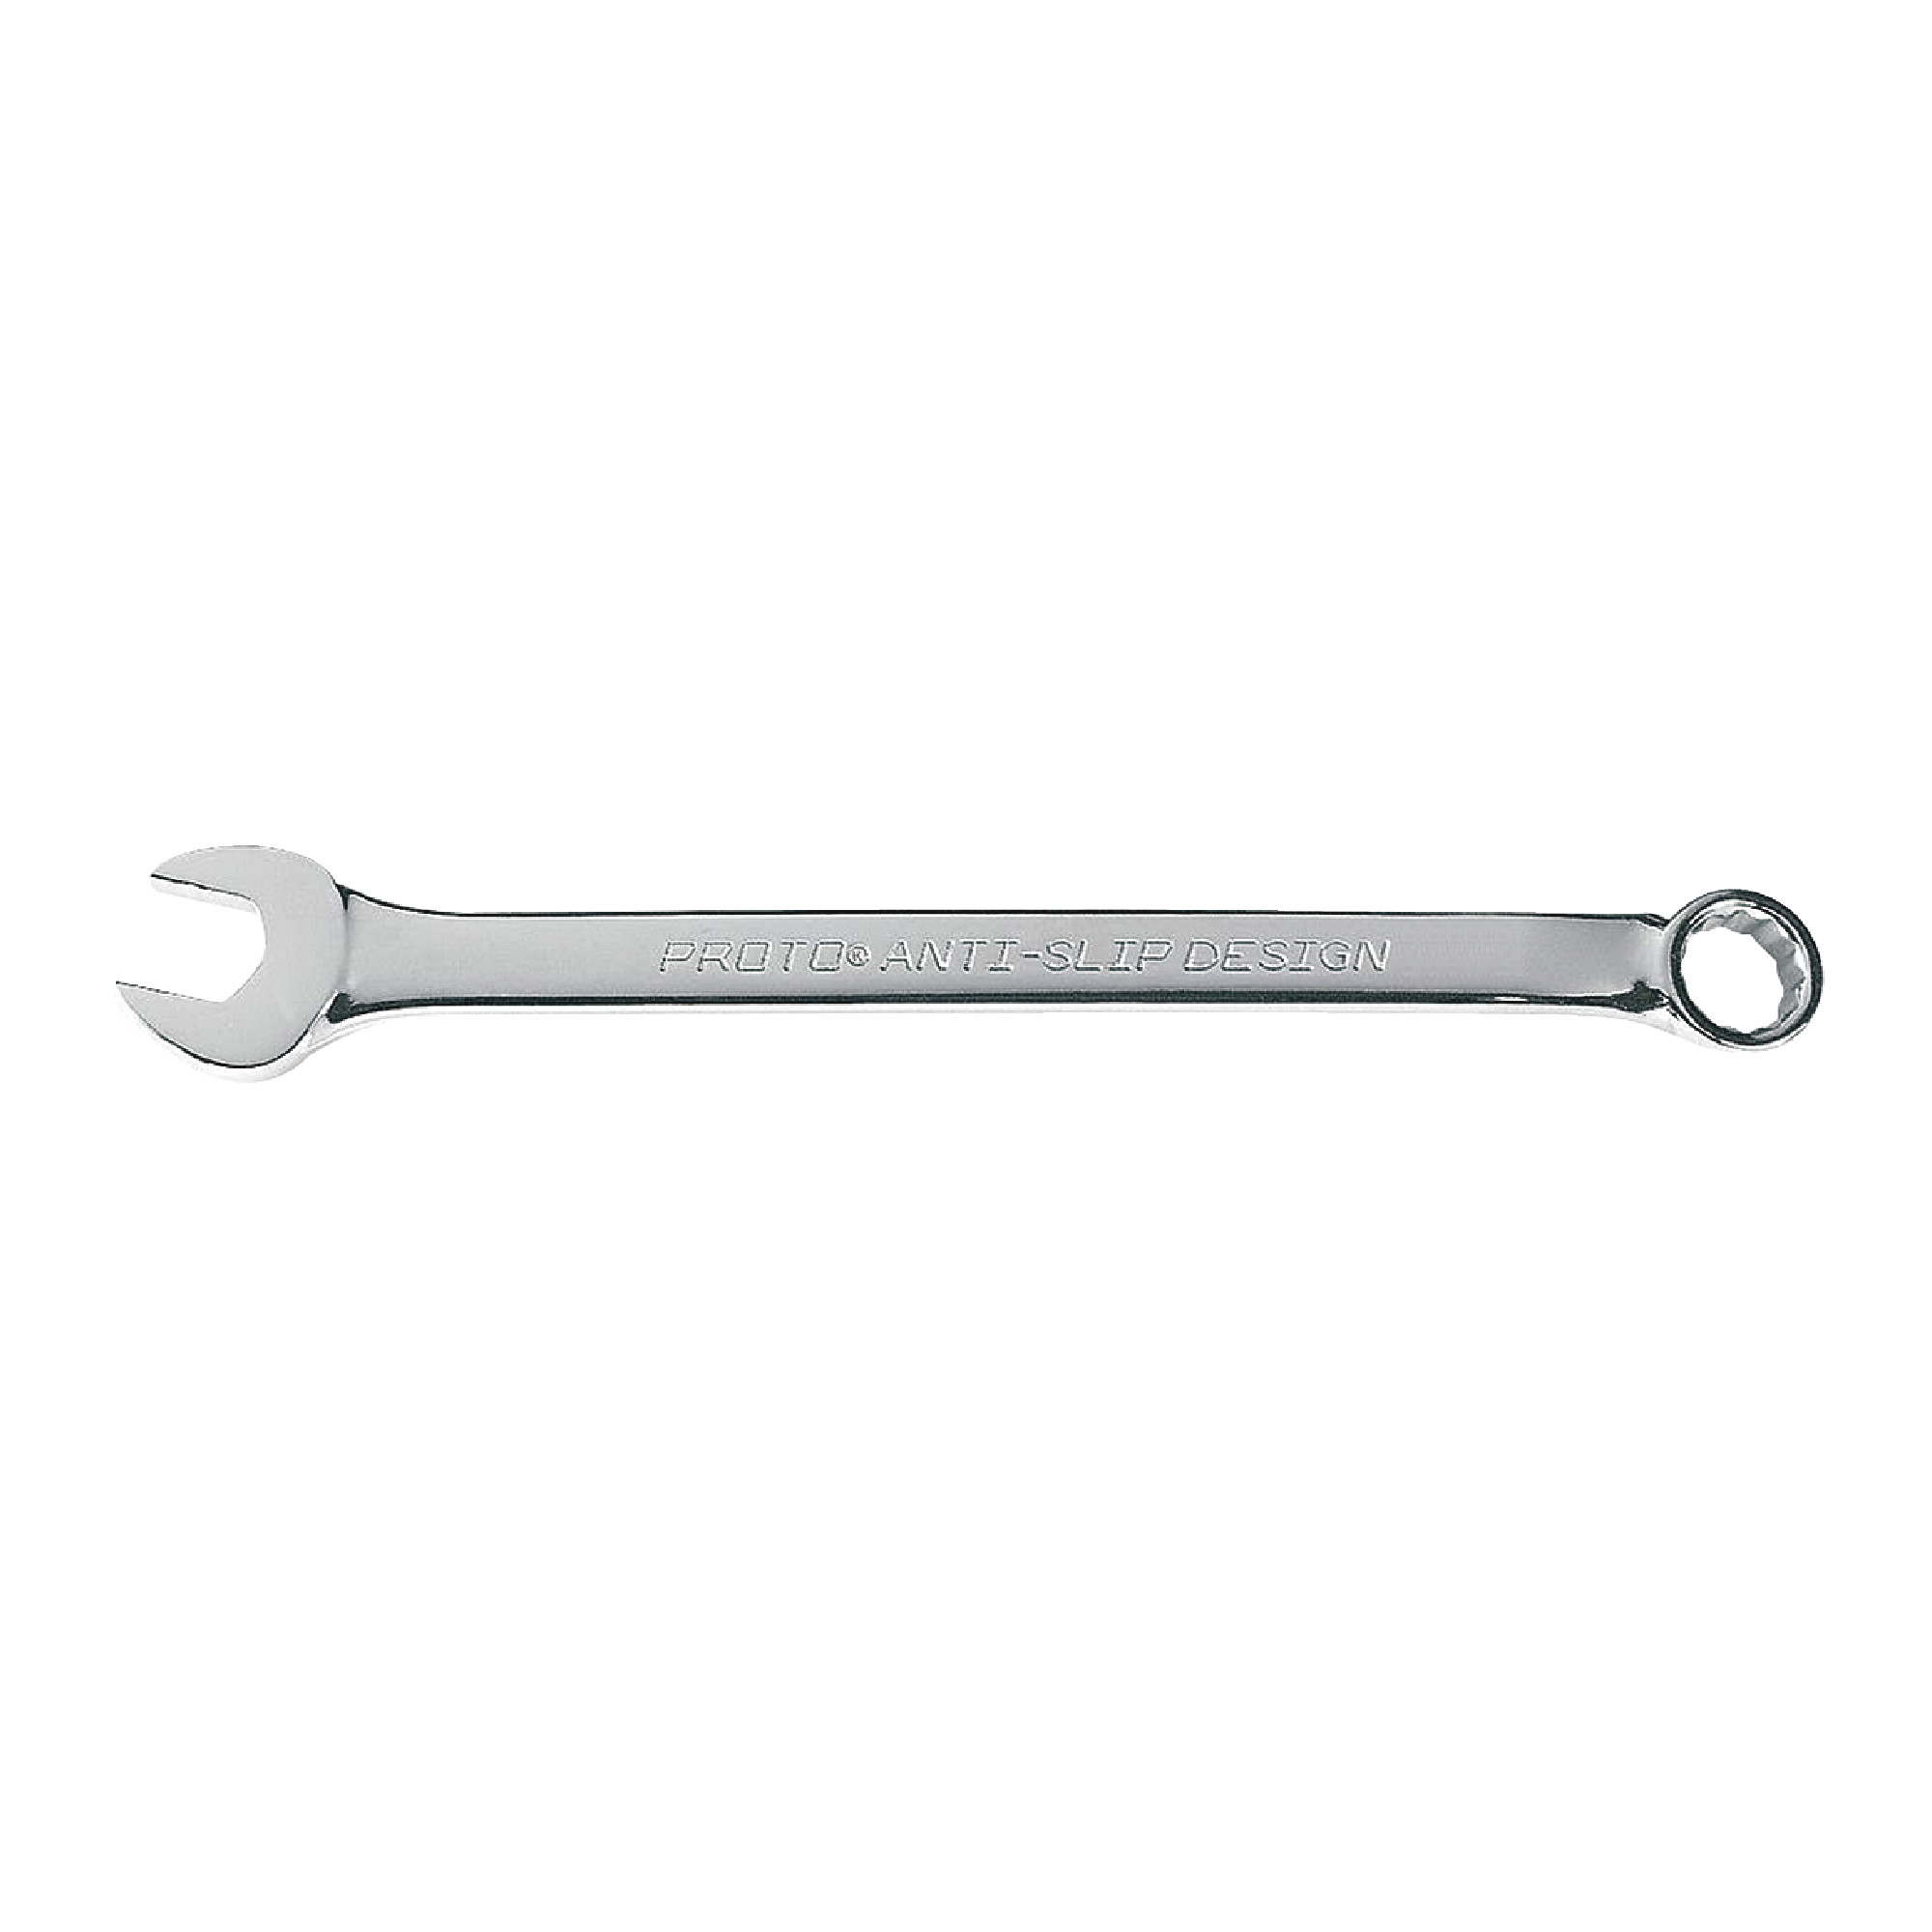 Satin Chrome Finish 24mm Combination Wrench